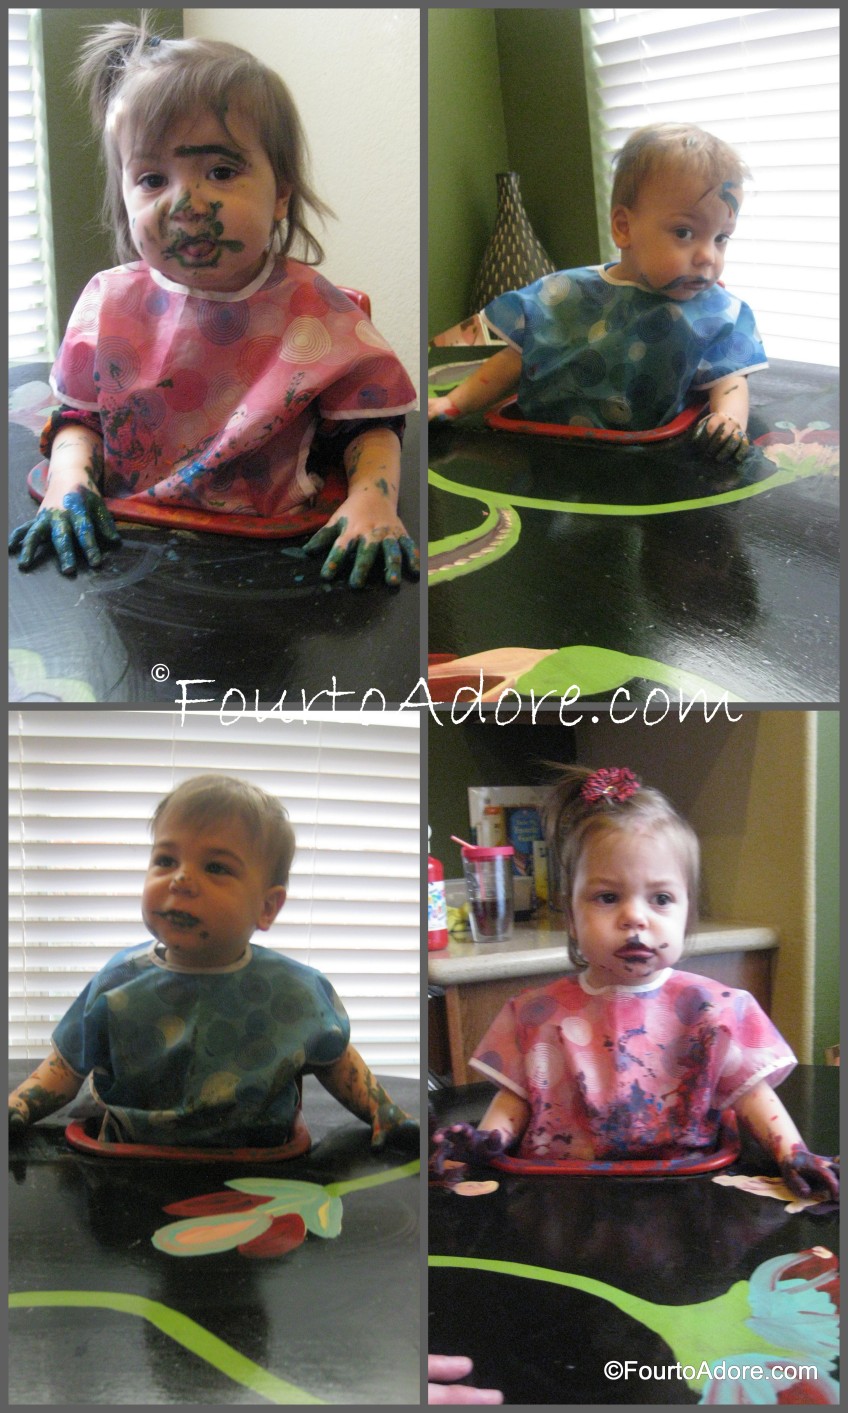 This is how everyone looked after painting their respective masterpieces.  I believe Rylin was channeling Frida Kahlo.